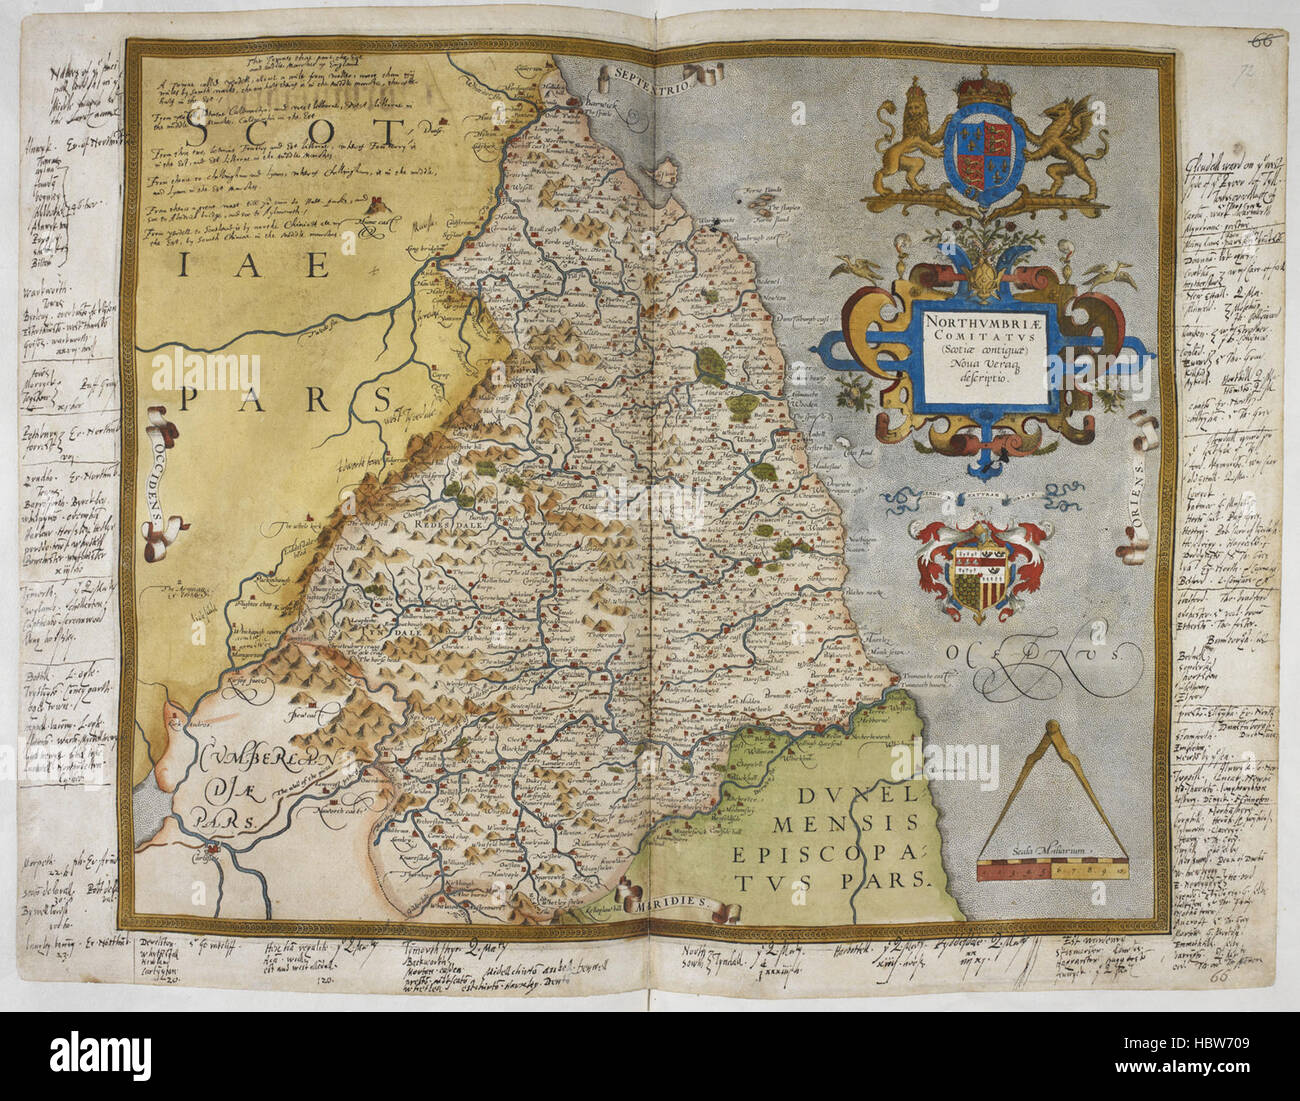 Lord Burghley's Atlas - caption: 'Engraved map of Northumberland, from drawings of Christopher Saxton. Dedicated to Queen Elizabeth I. With annotations in the hand of Lord Burghley.' Lord Burghley's Atlas - caption 'Engraved map of Northumberland, from Stock Photo